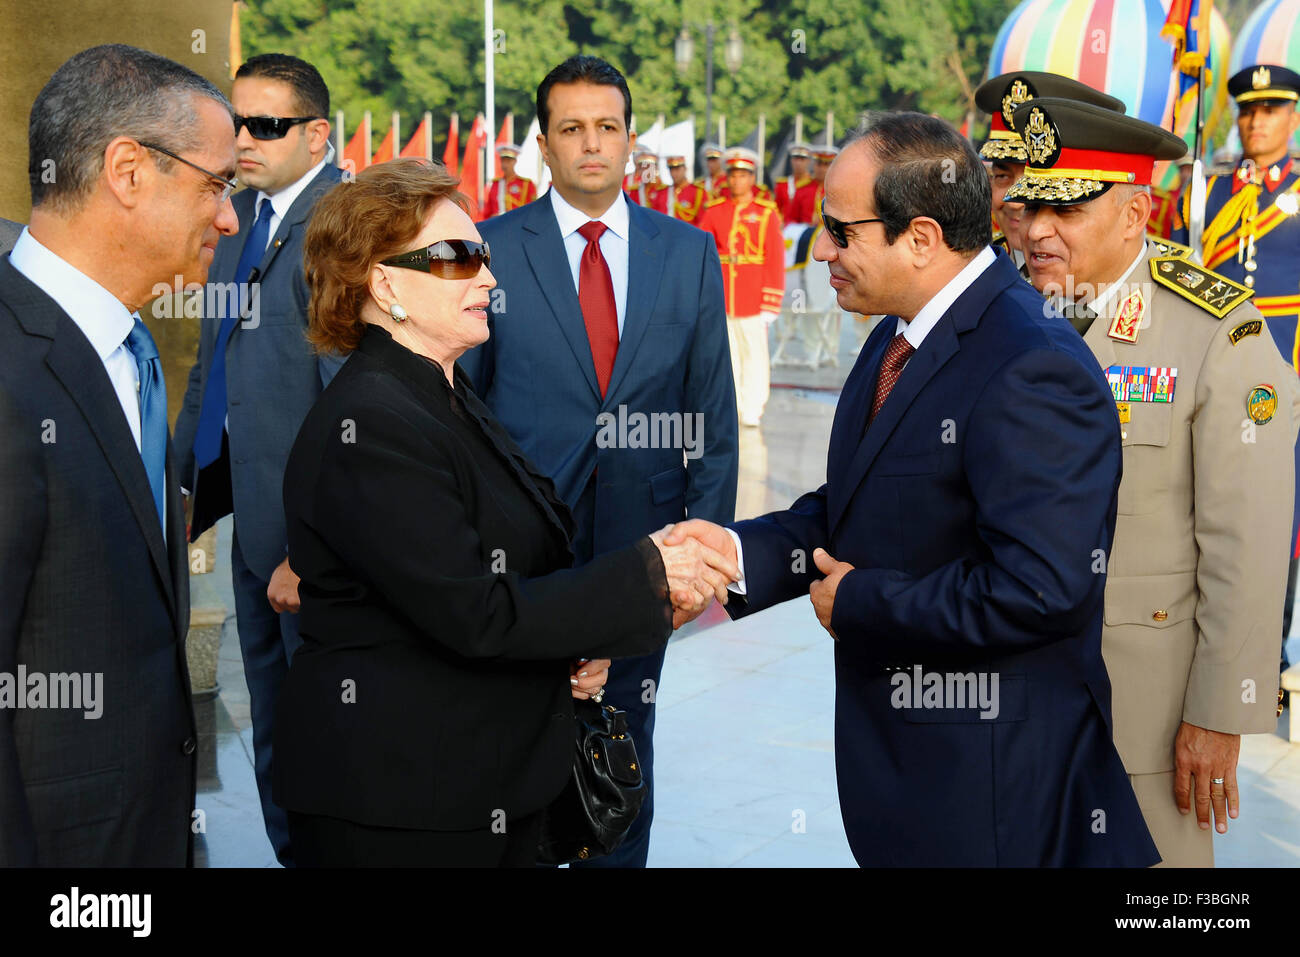 Cairo, Egypt. 4th Oct, 2015. A handout picture released by the Egyptian Presidency shows Egyptian President Abdul Fattah al-Sisi (2ndR) shake hands with widow of former Egyptian President Sadat's after visiting his grave during a ceremony at the memorial of the Unknown Soldier and tombs of late Egyptian presidents on October 4, 2015 in Cairo, as part of the celebrations marking the 42th anniversary of October War Victory © Egyptian President Office/APA Images/ZUMA Wire/Alamy Live News Stock Photo